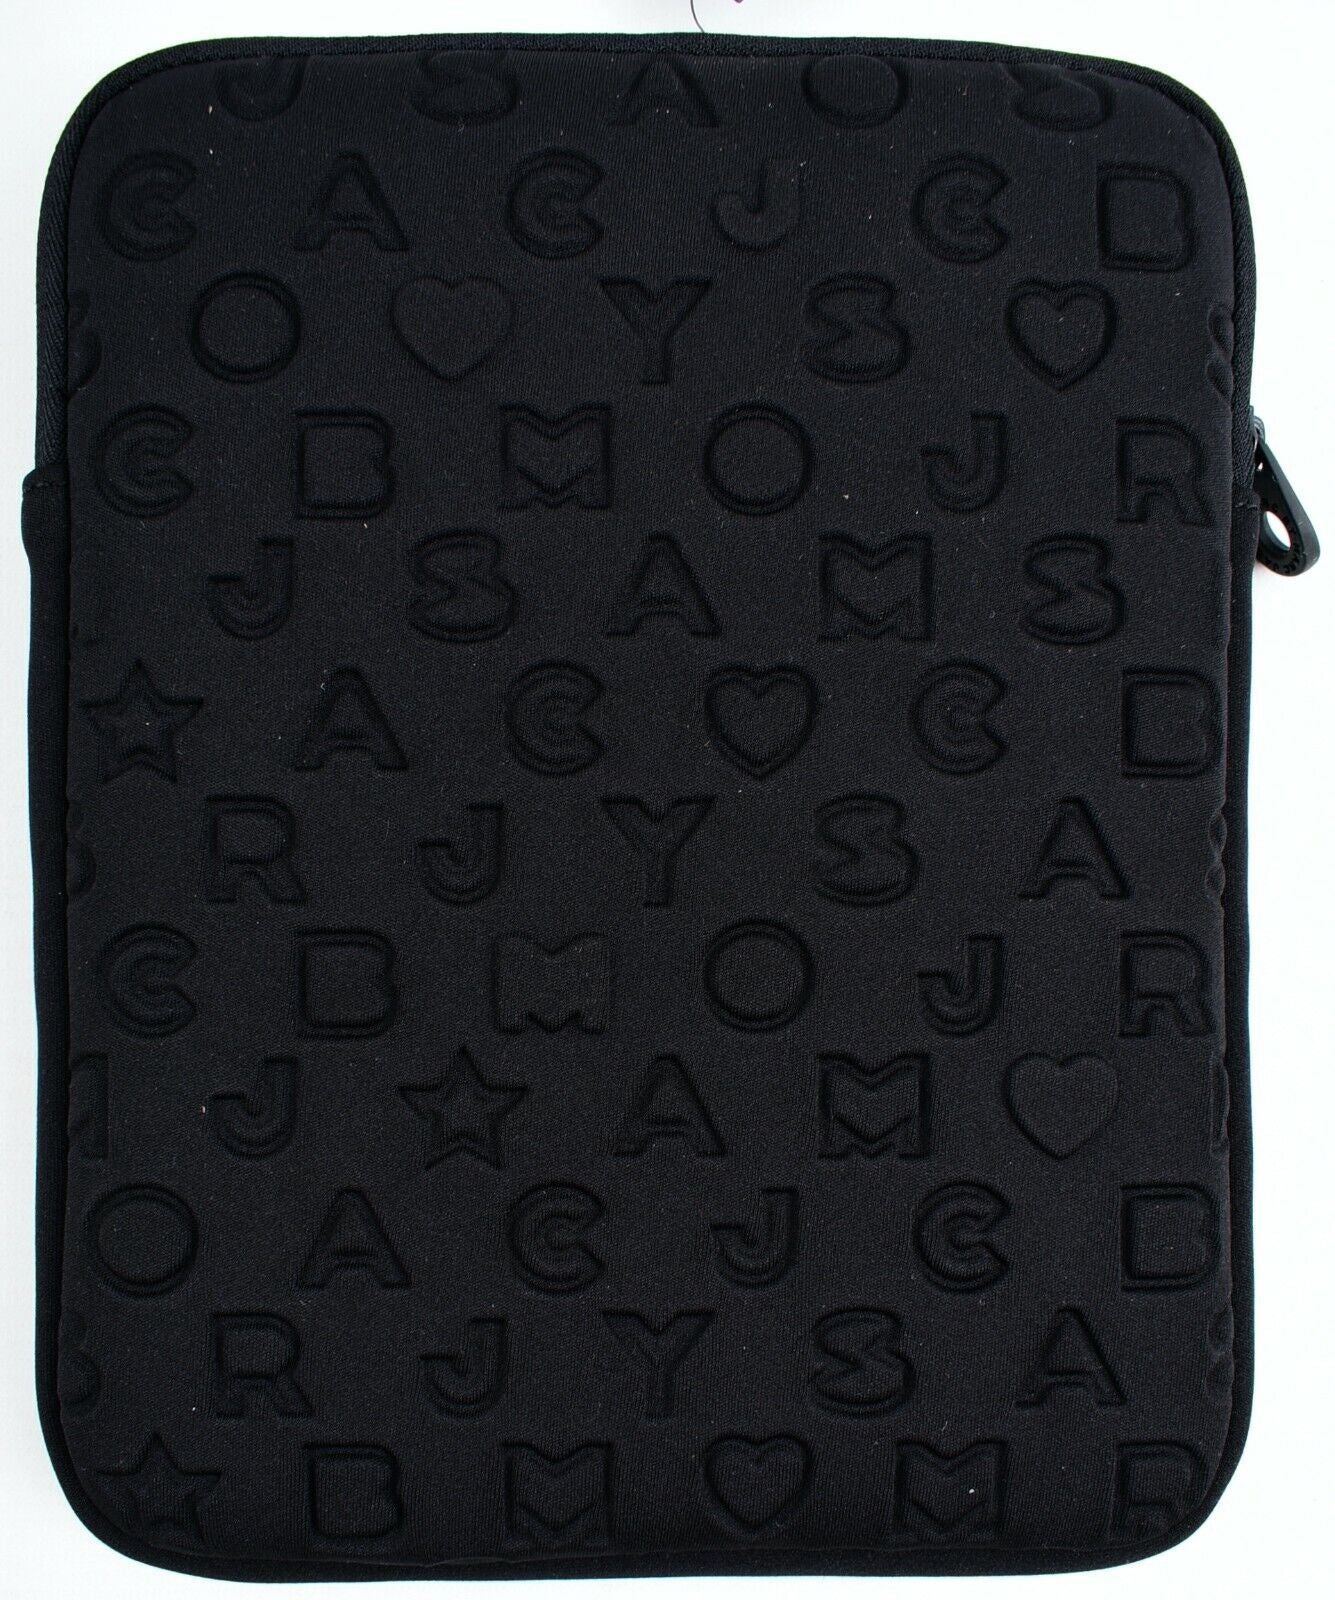 MARC by MARC JACOBS Zip Around Padded iPad Tablet Case - Black